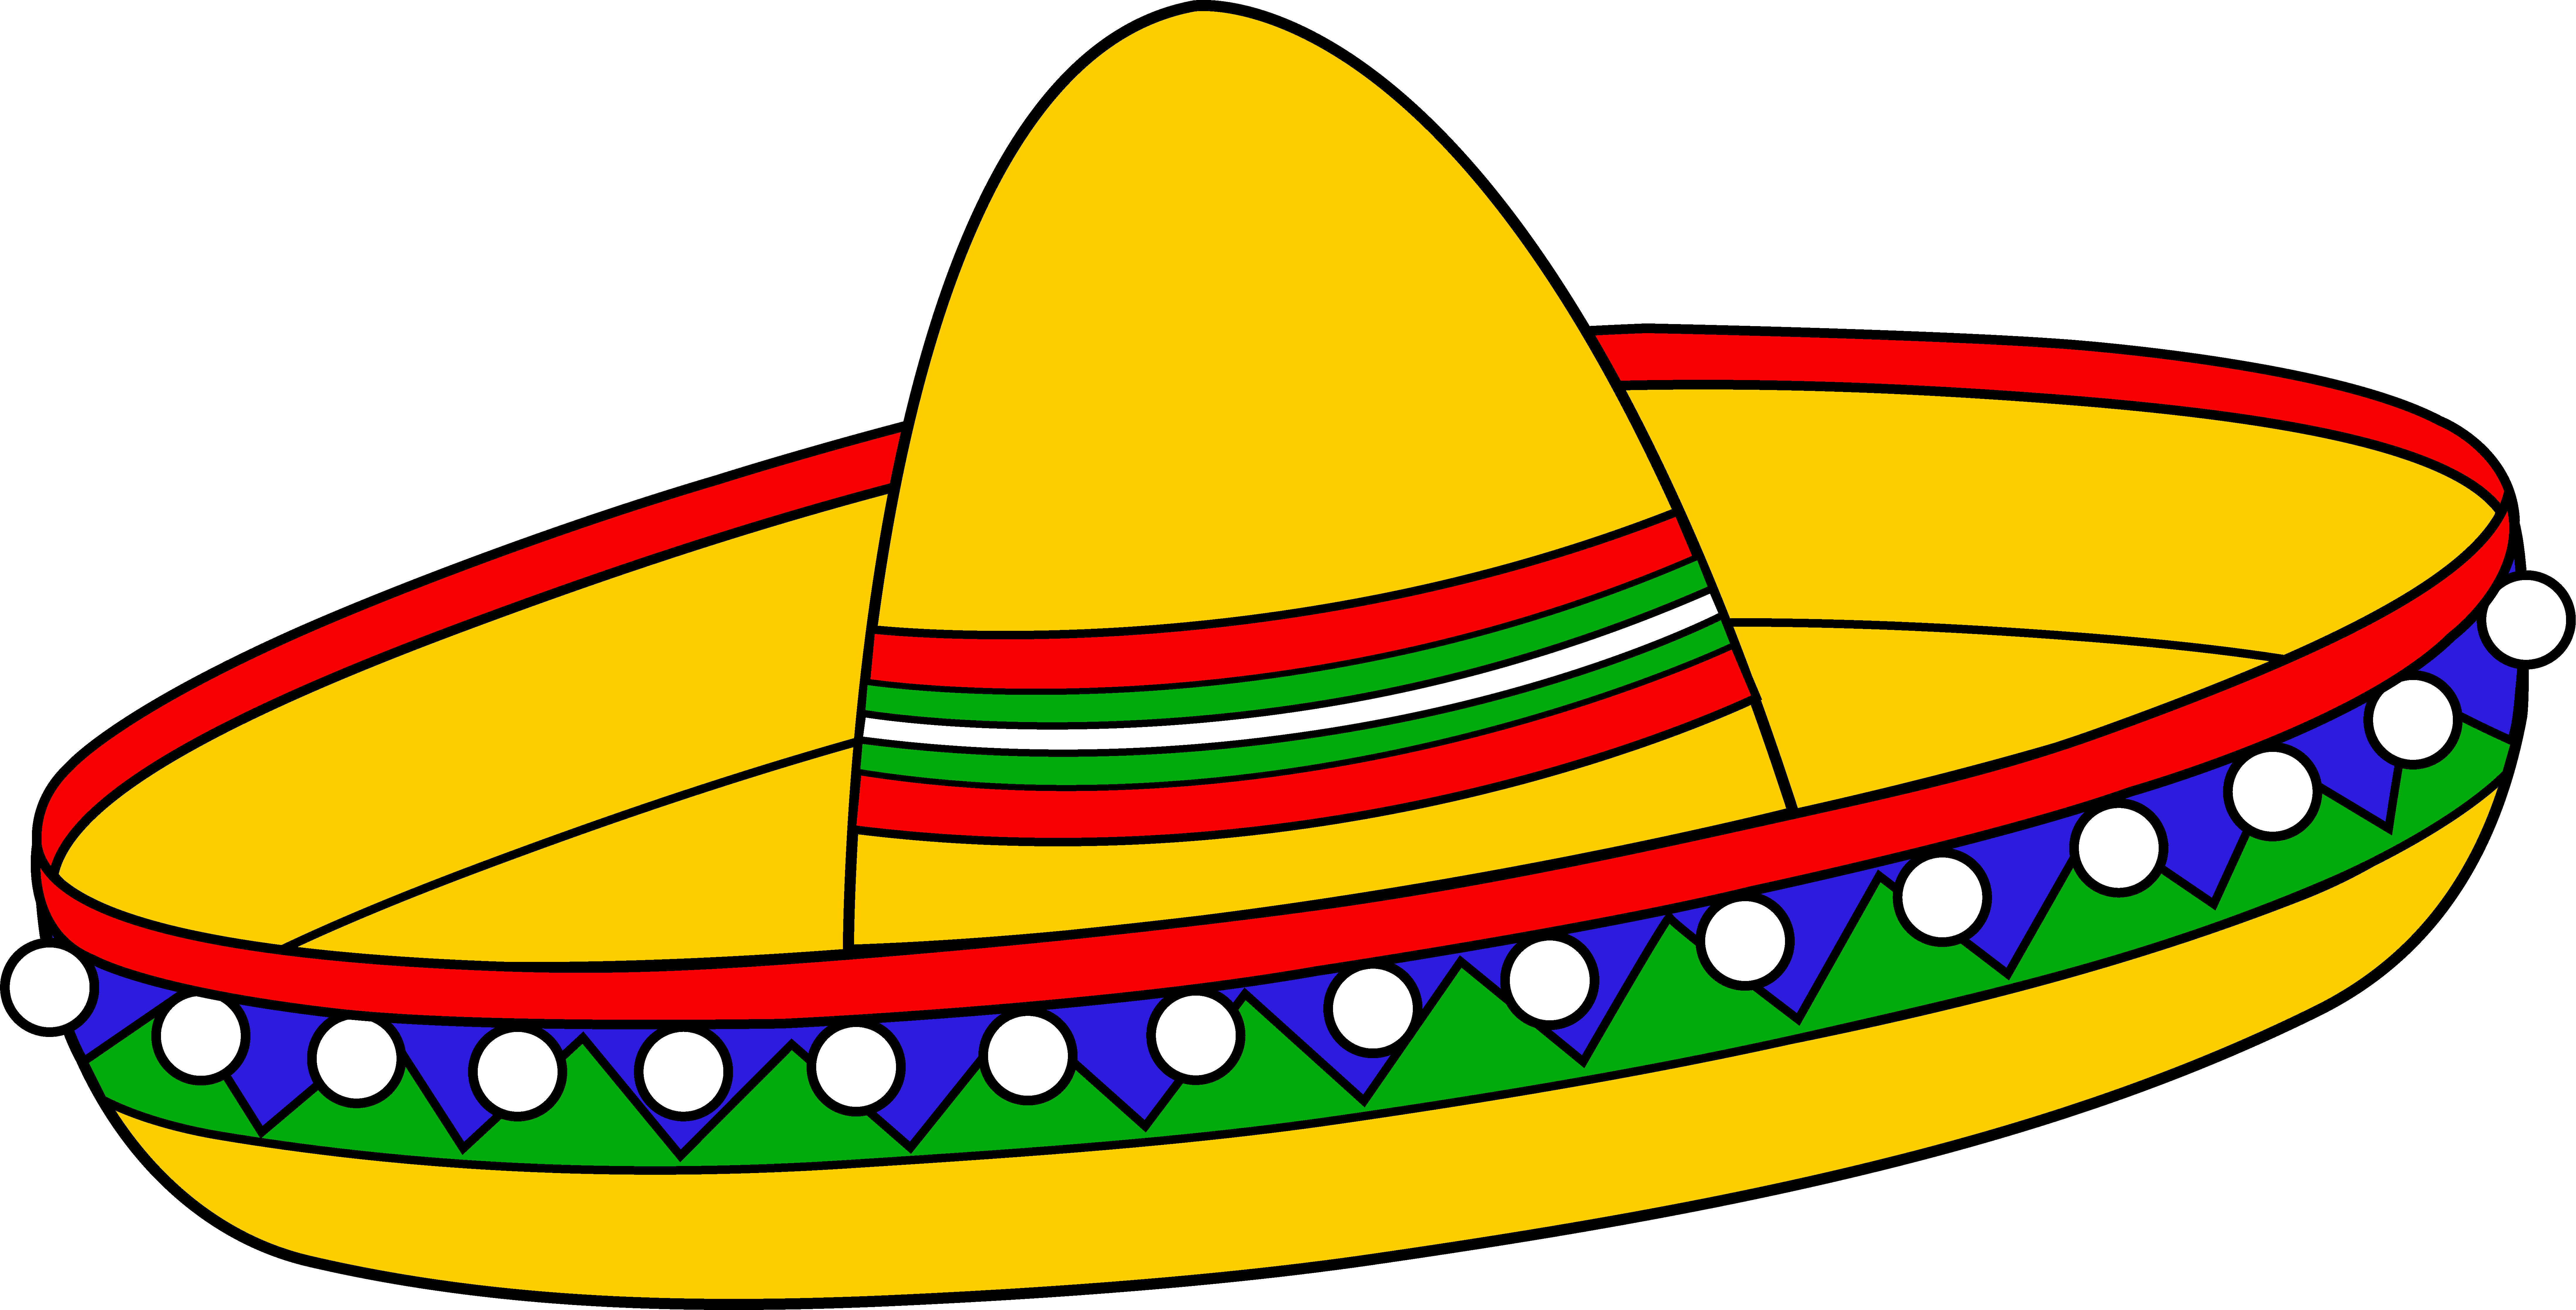 Free Mexican Sombrero Hat Download Free Mexican Sombrero Hat Png Images Free Cliparts On Clipart Library